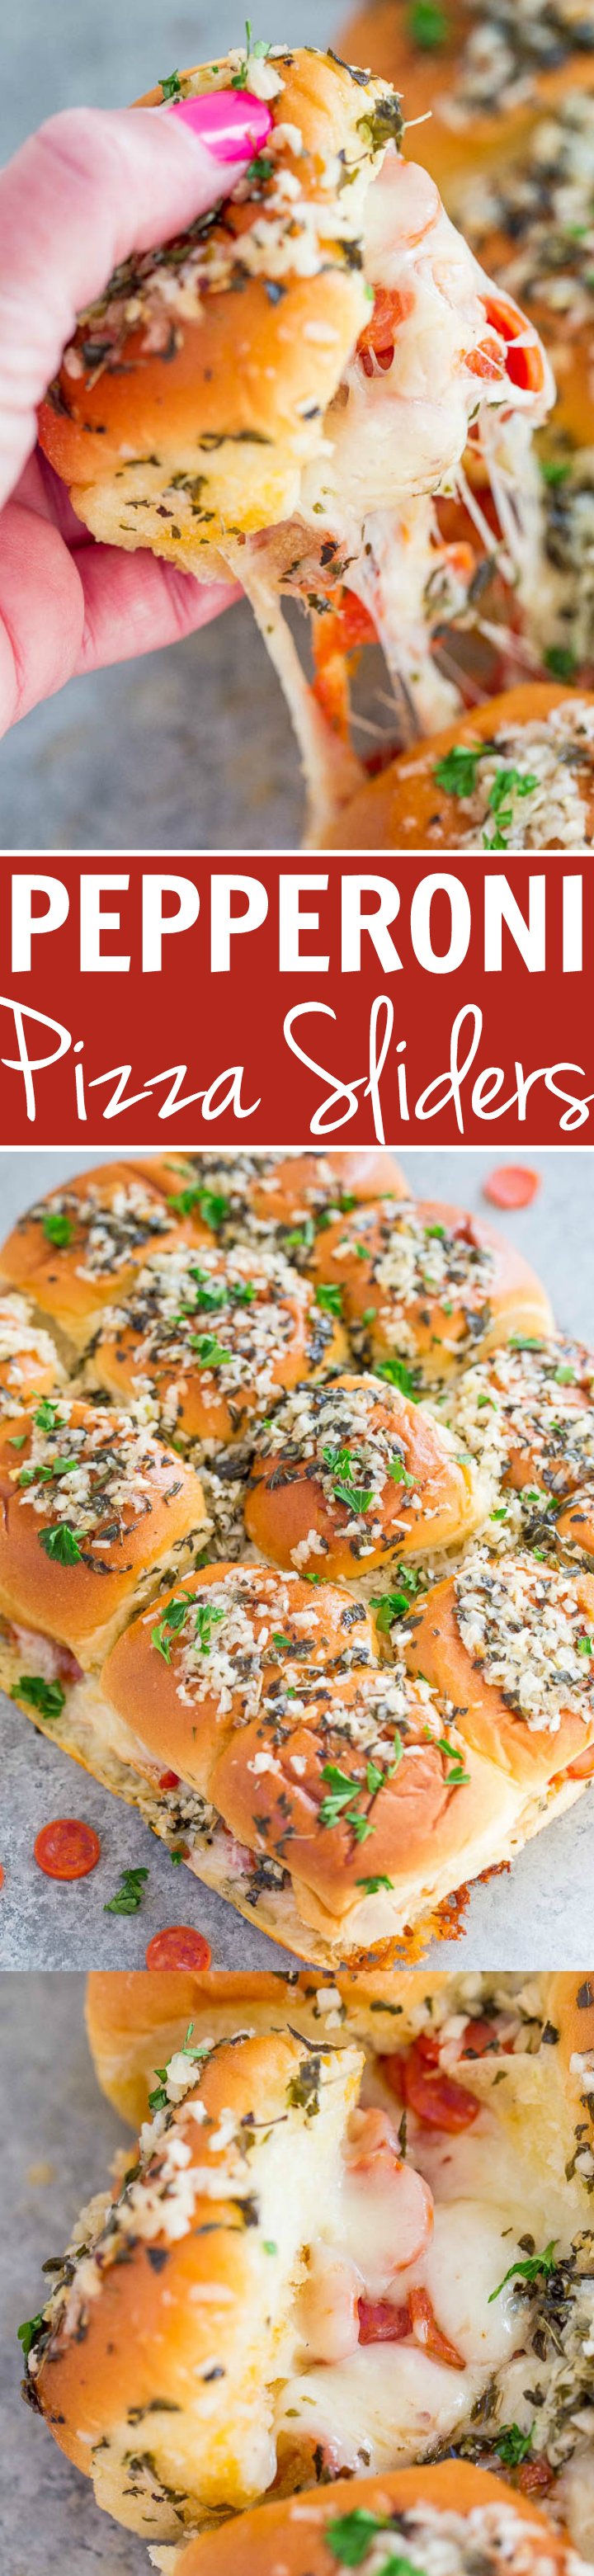 Pepperoni Pizza Sliders - Pizza by way of supremely cheesy sliders!! EASY, ready in 15 minutes, and perfect for parties because everyone LOVES them! Totally IRRESISTIBLE!!